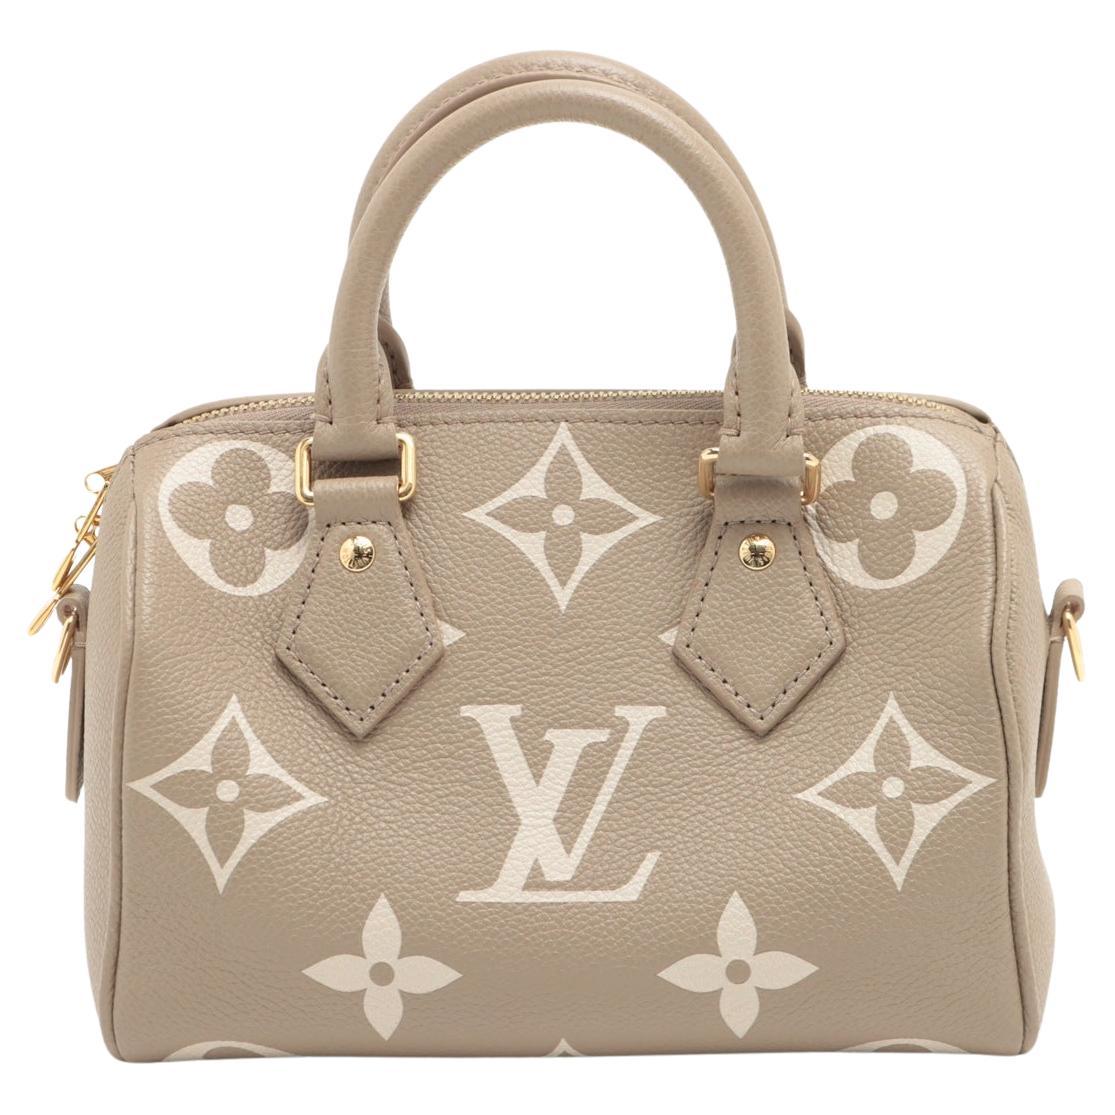 Santa needs to bring you this previously owned louis vuitton epi